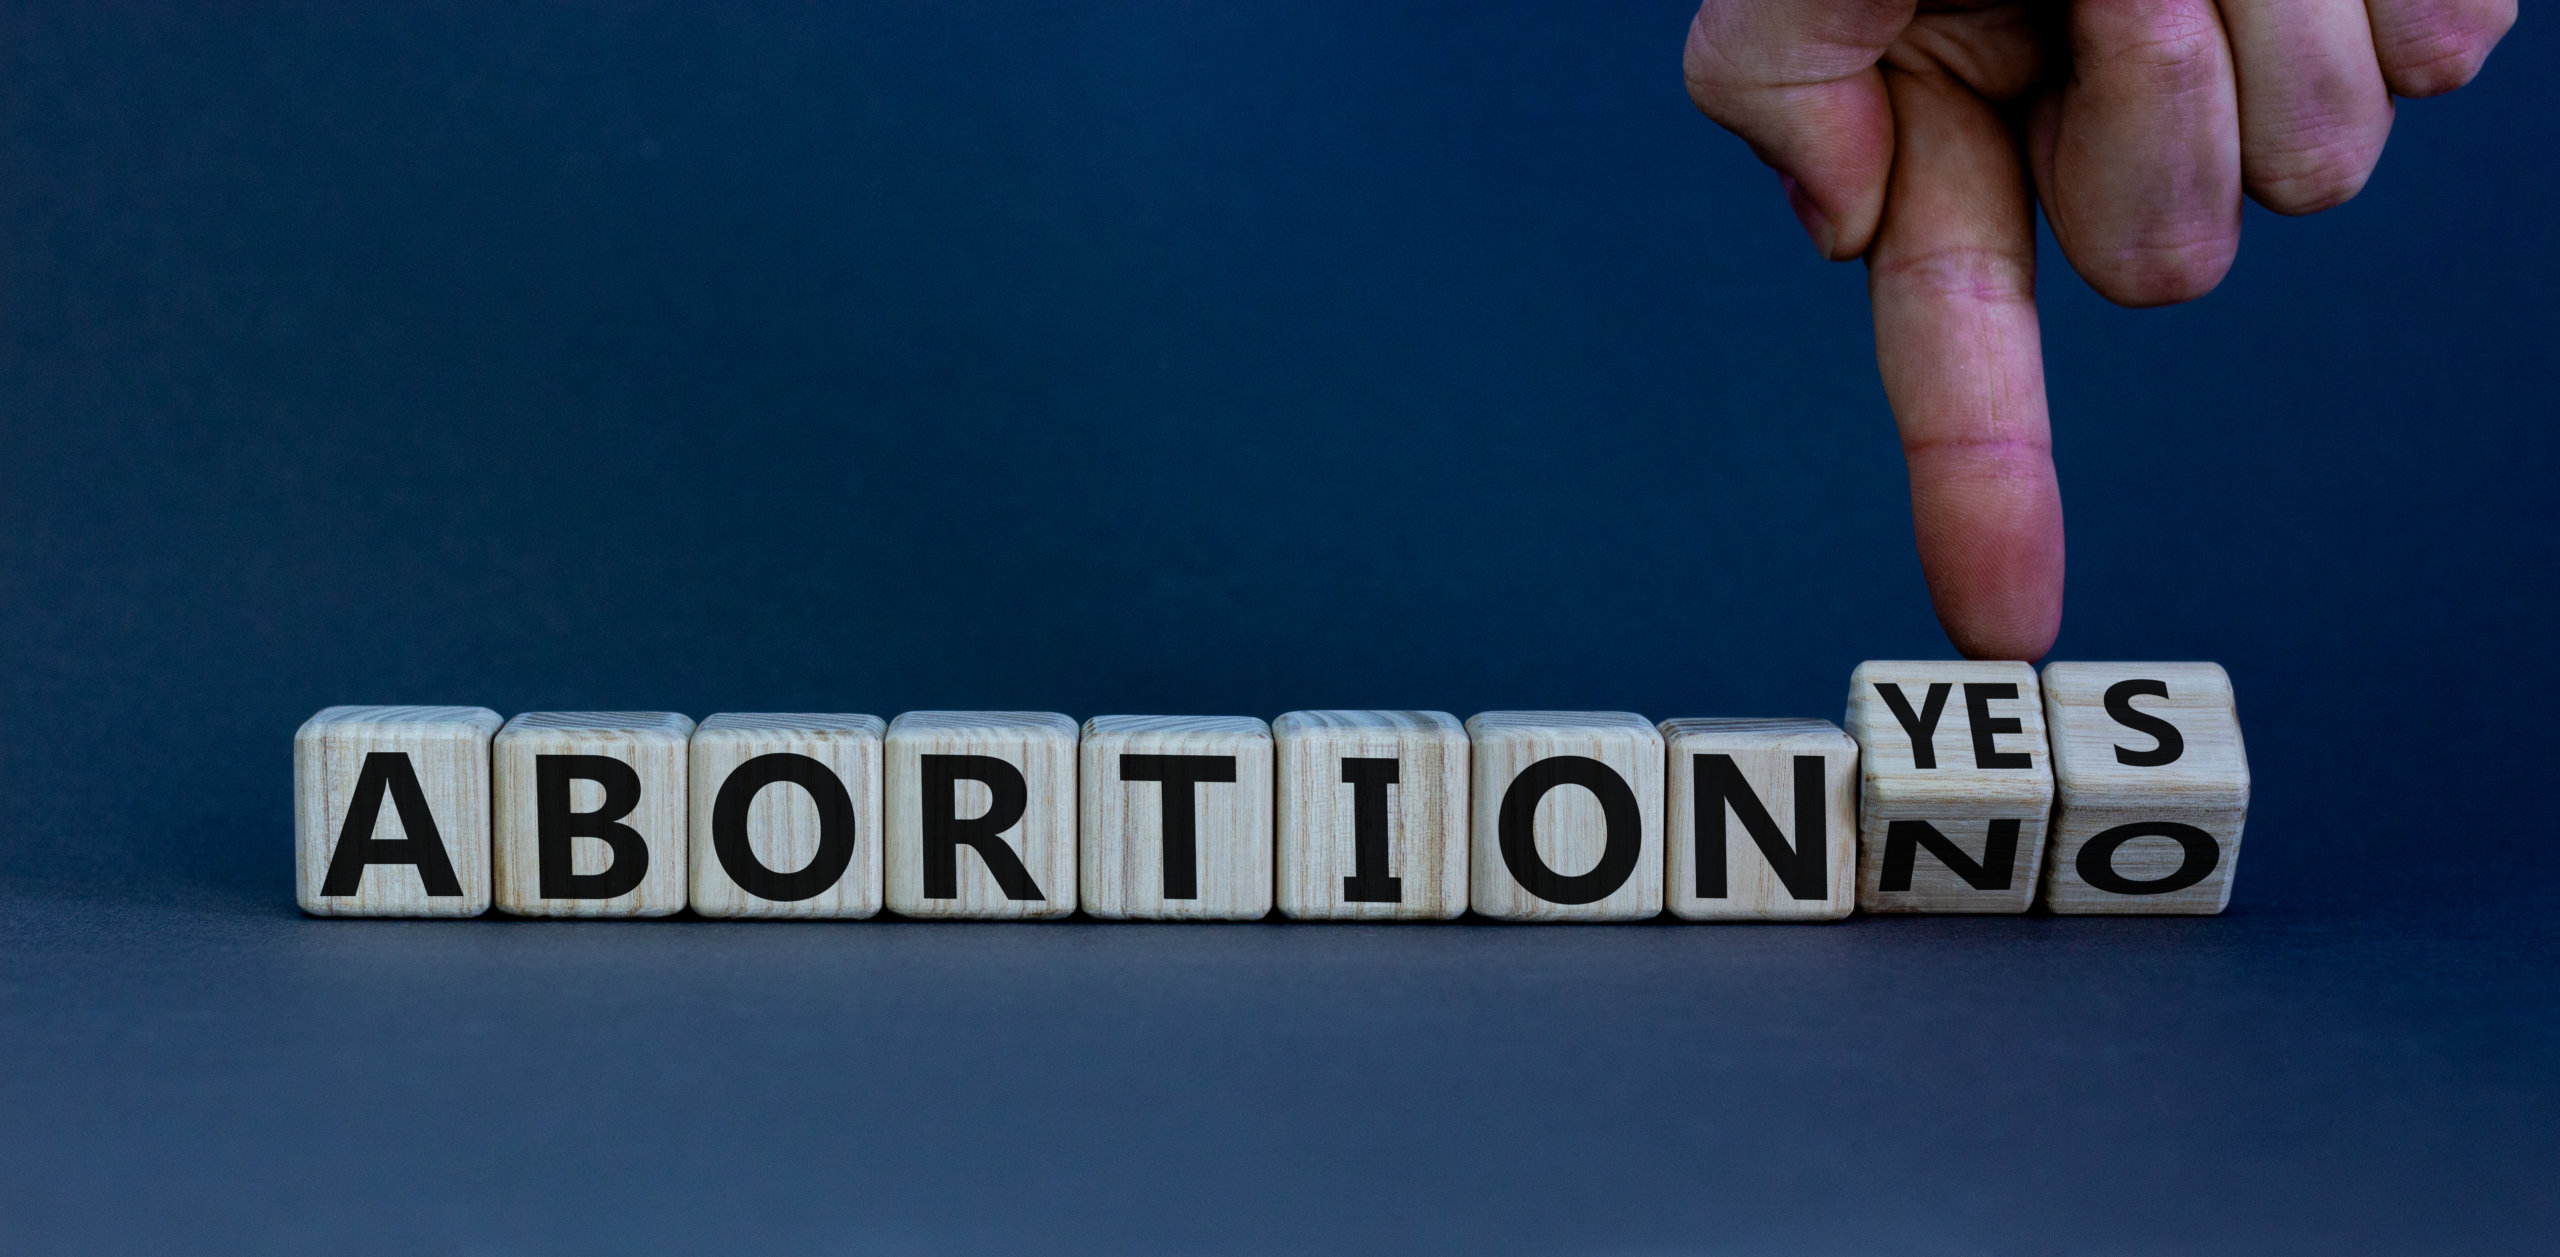 Abortion opponents take political risks by dropping exceptions for rape, incest, and the mother’s life